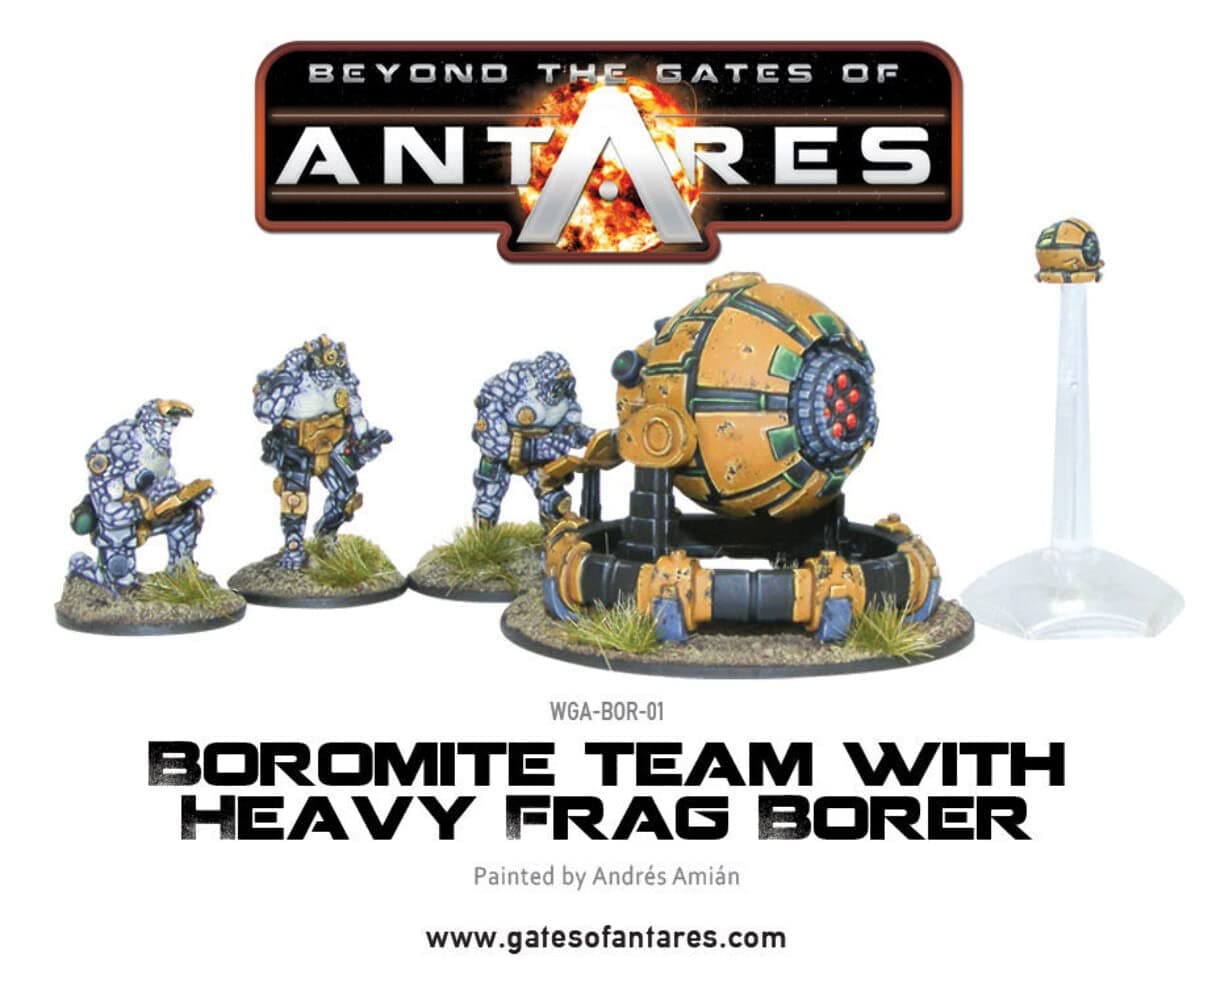 Warlord Games Miniatures Games Warlord Games Gates of Antares: Boromite Team with Heavy Frag Borer